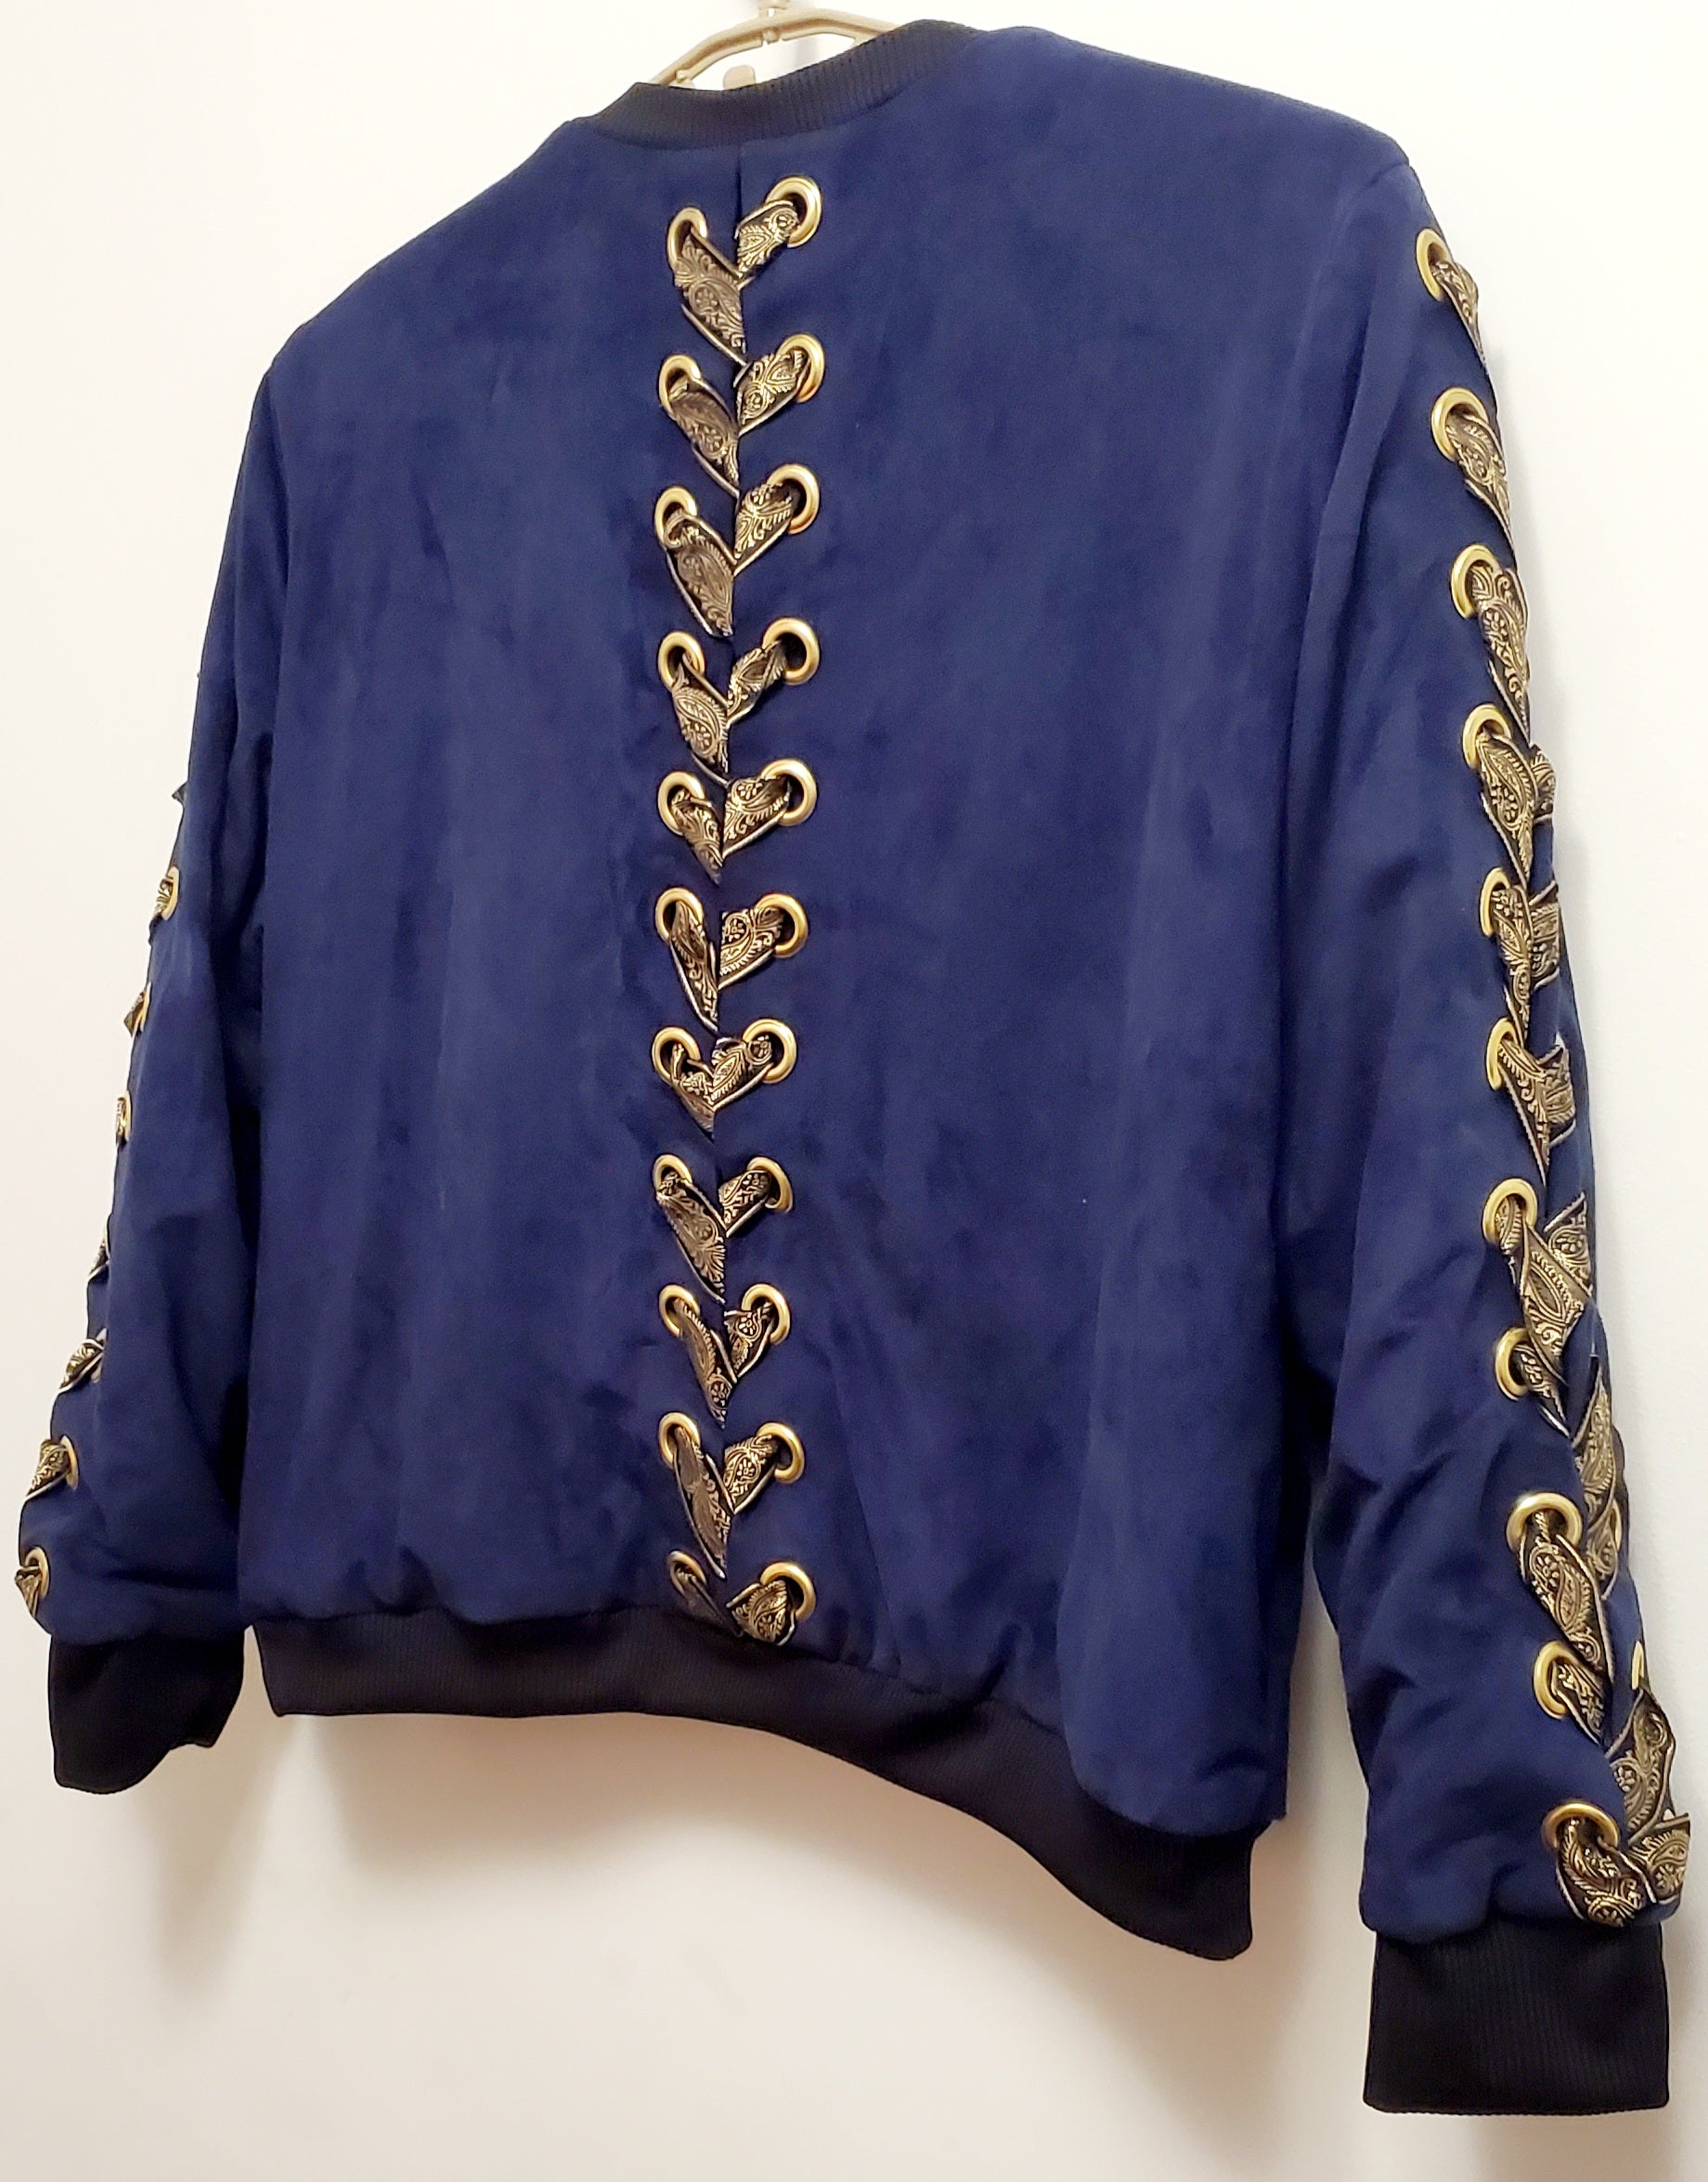 REIGN-Navy blue bomber jacket with hook and eye front and laced sleeves and back